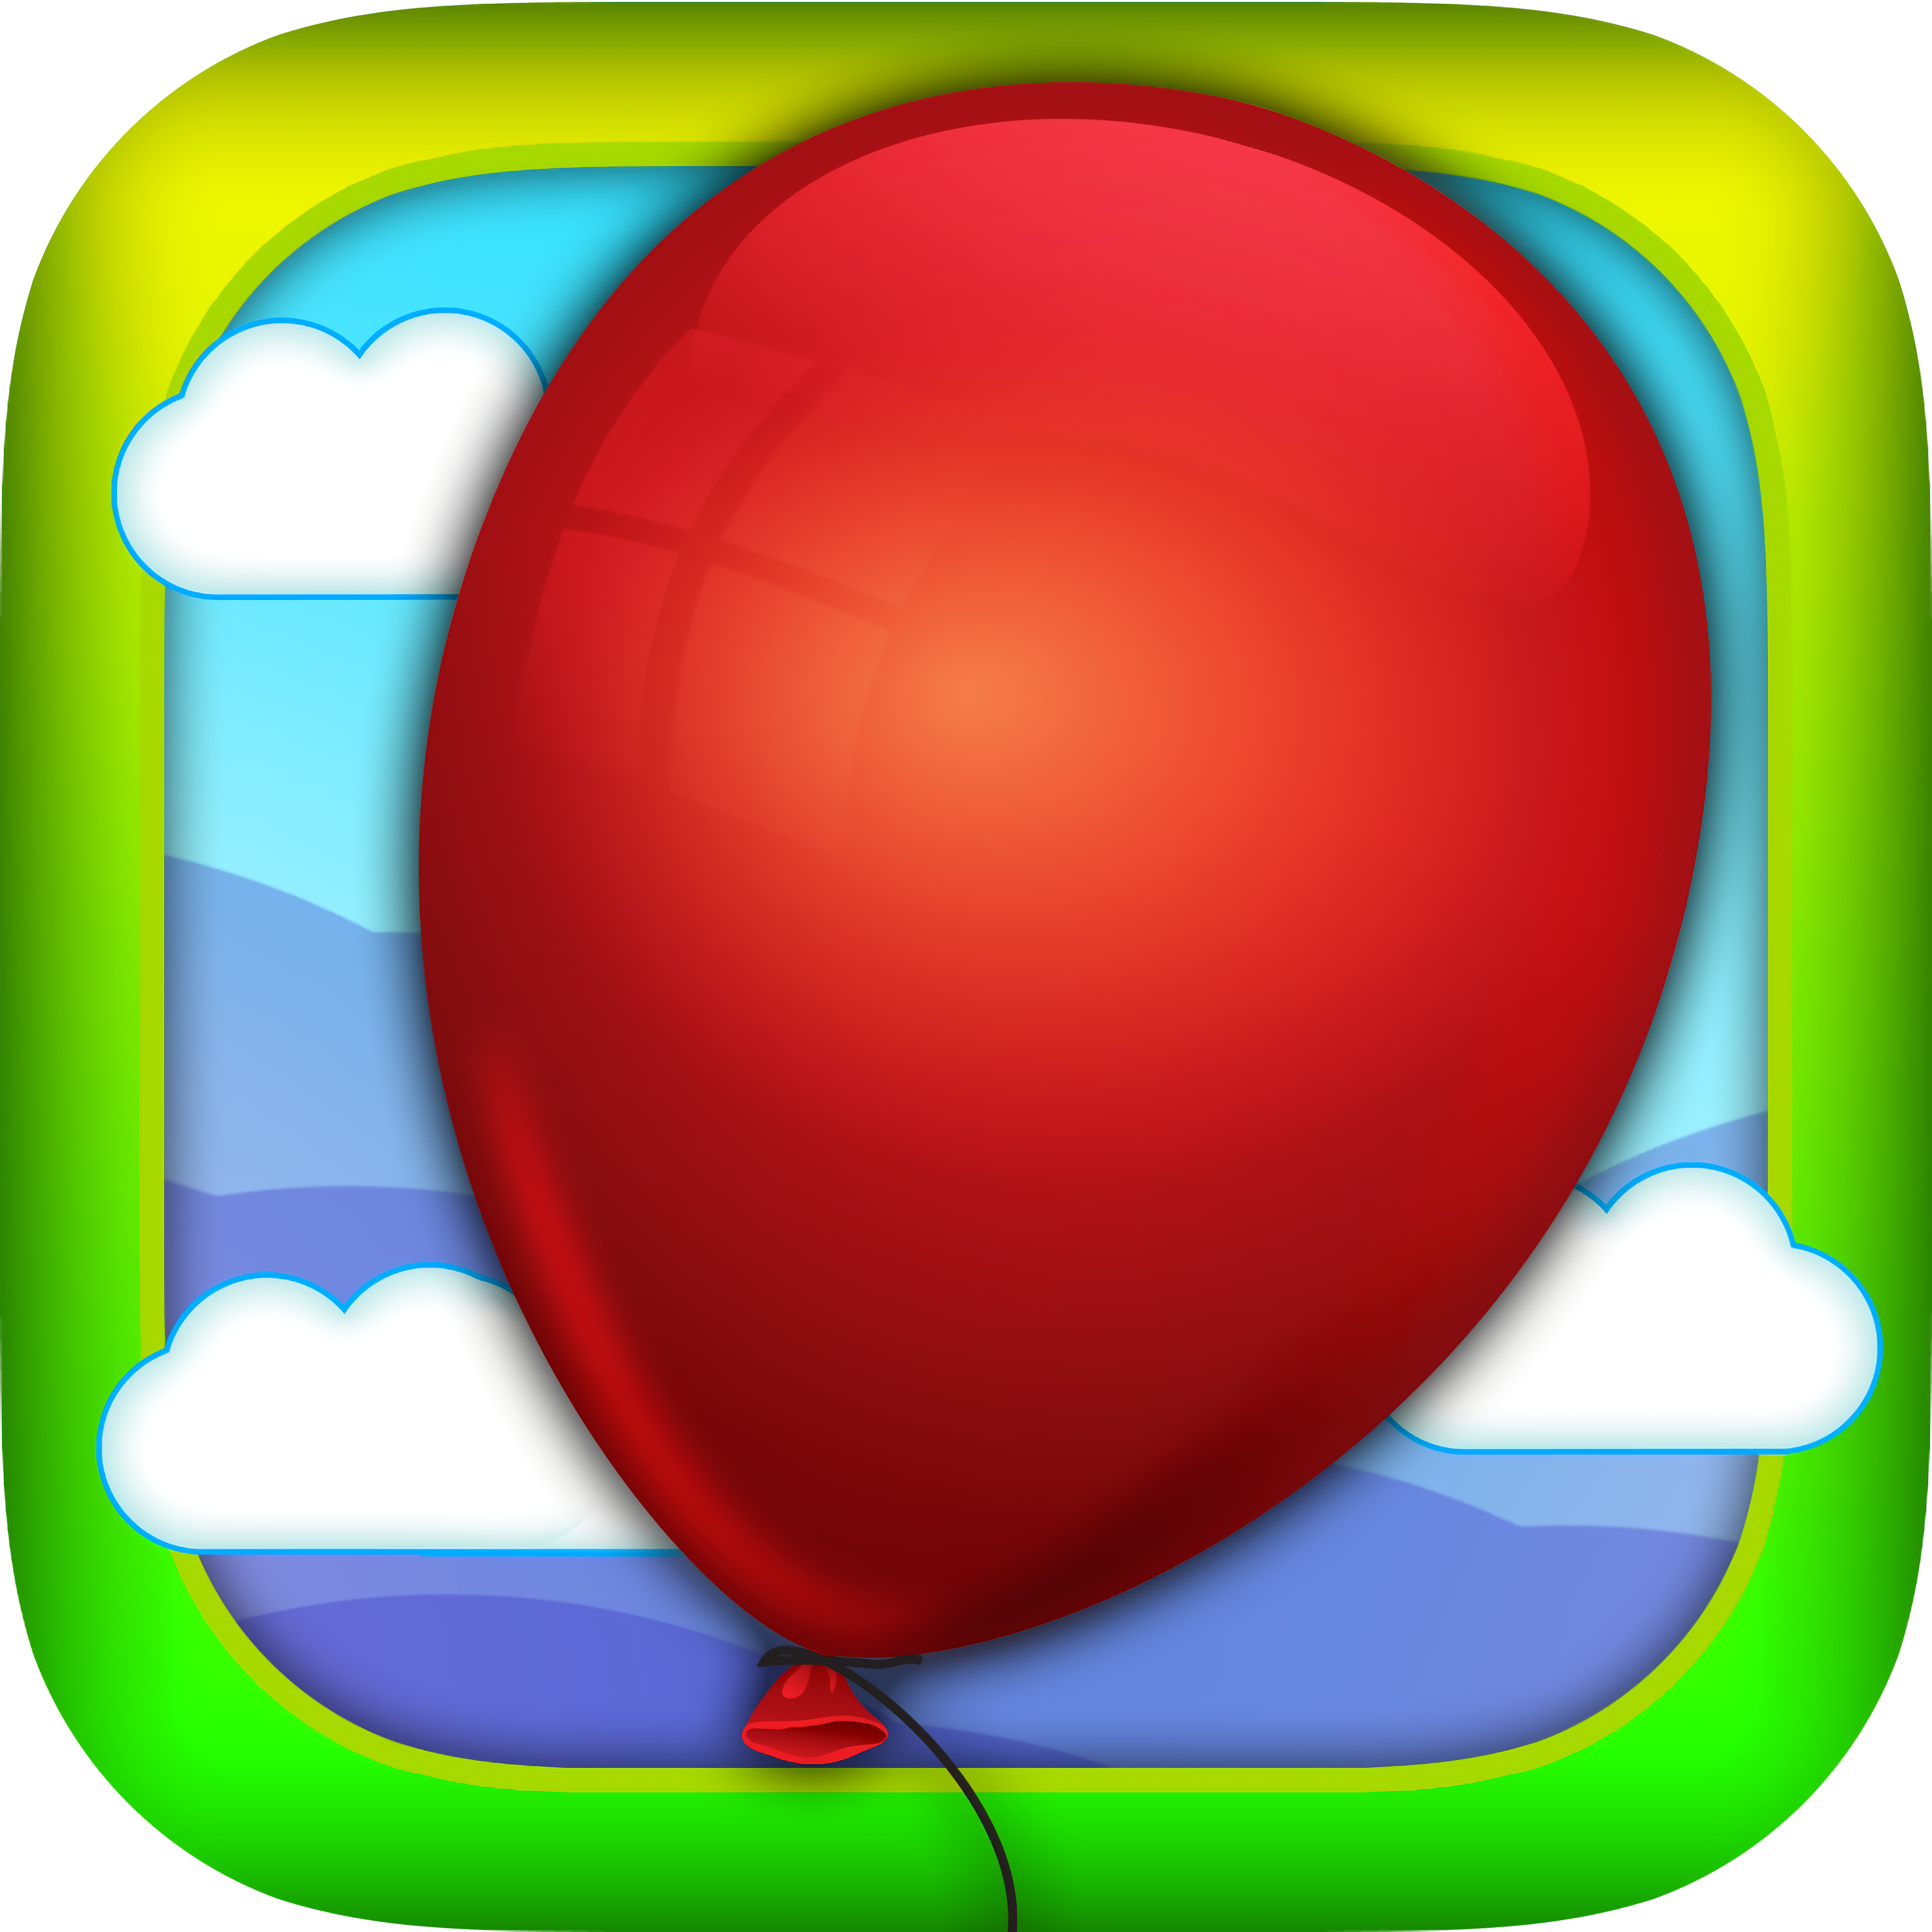 Bloons Spiele